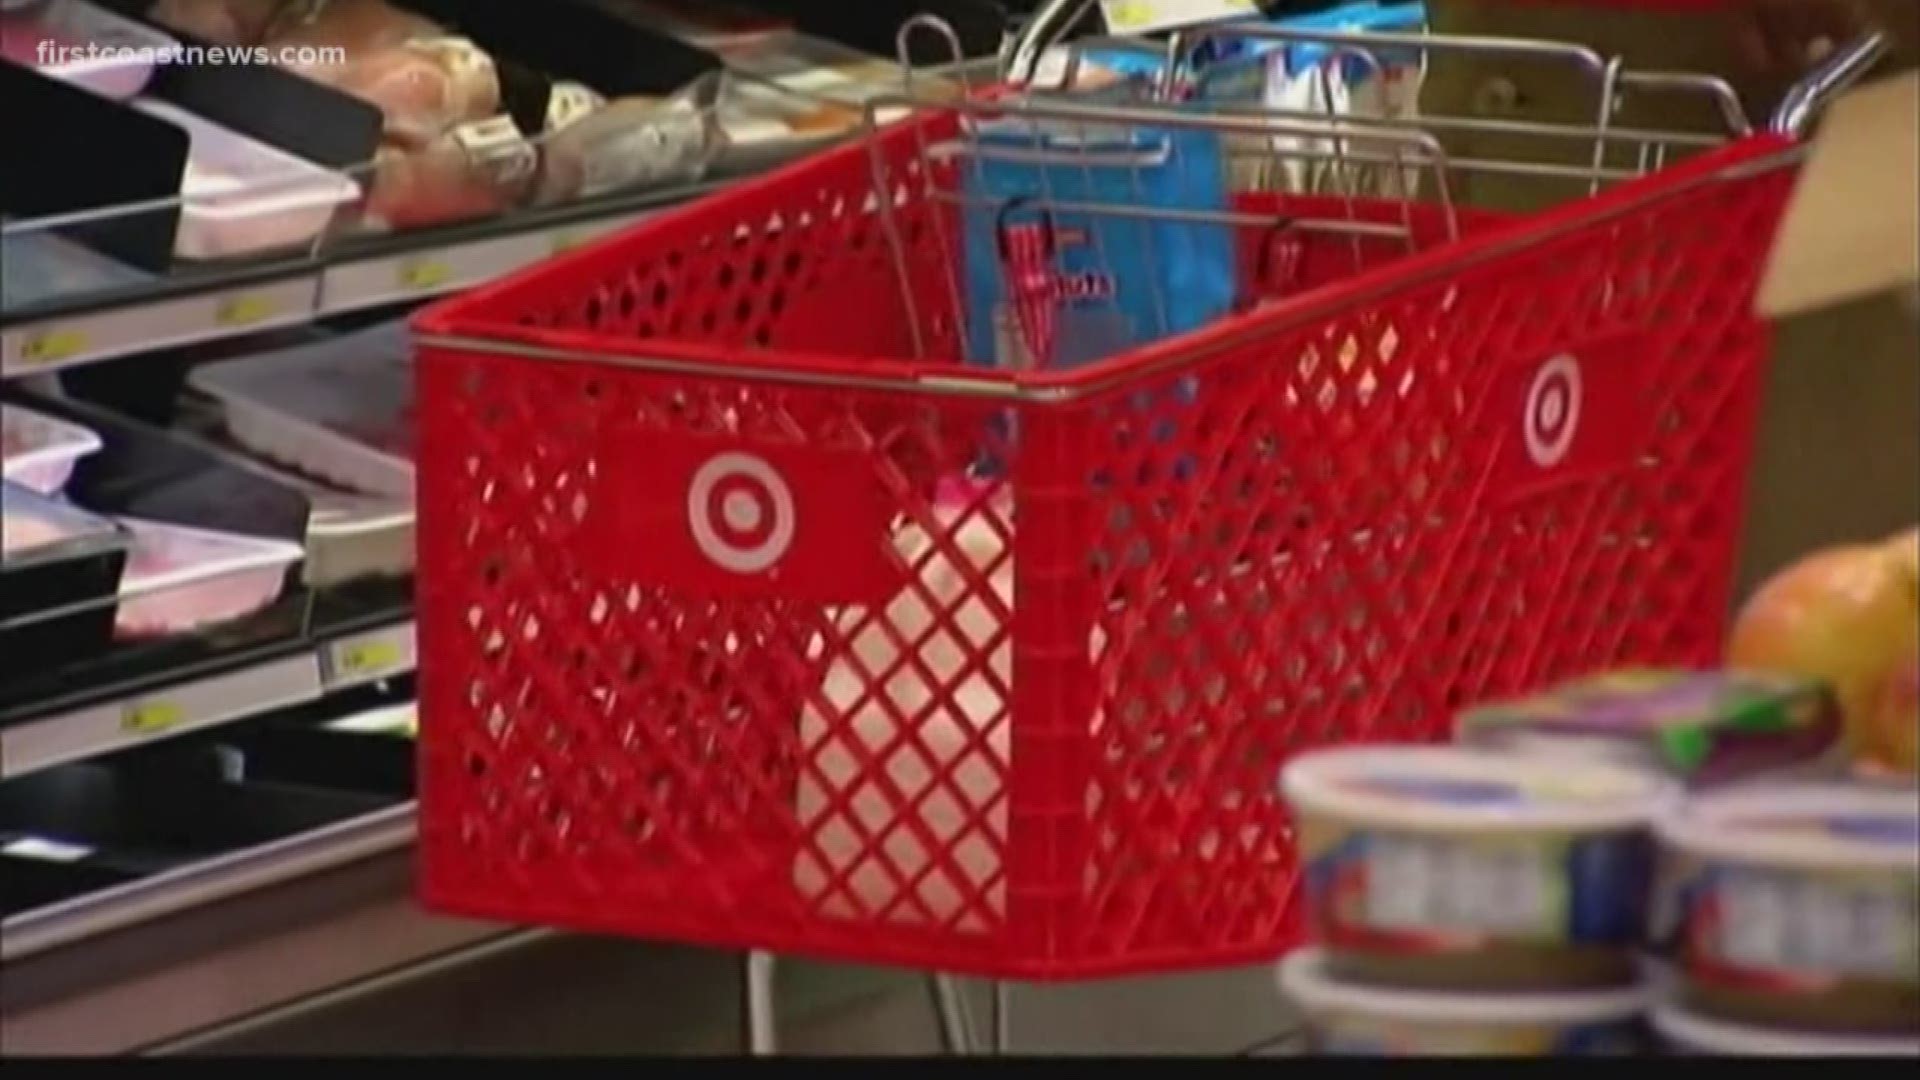 Starting April 4, Target stores will monitor and limit the number of guests allowed inside its stores, when necessary.